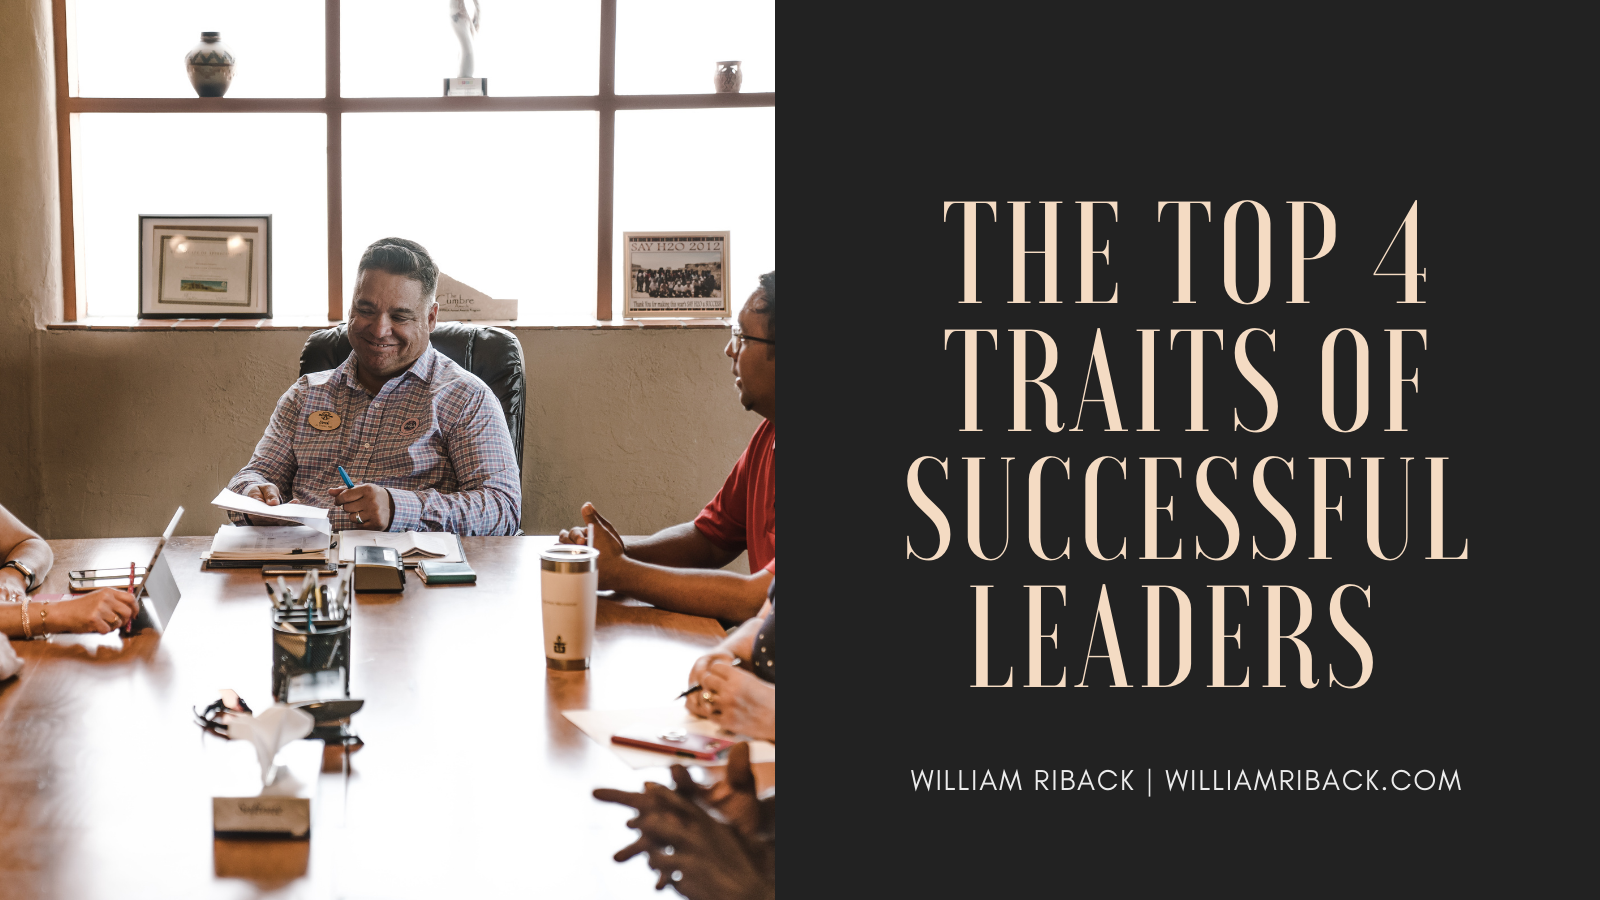 Top 4 Traits of Successful Leaders William Riback